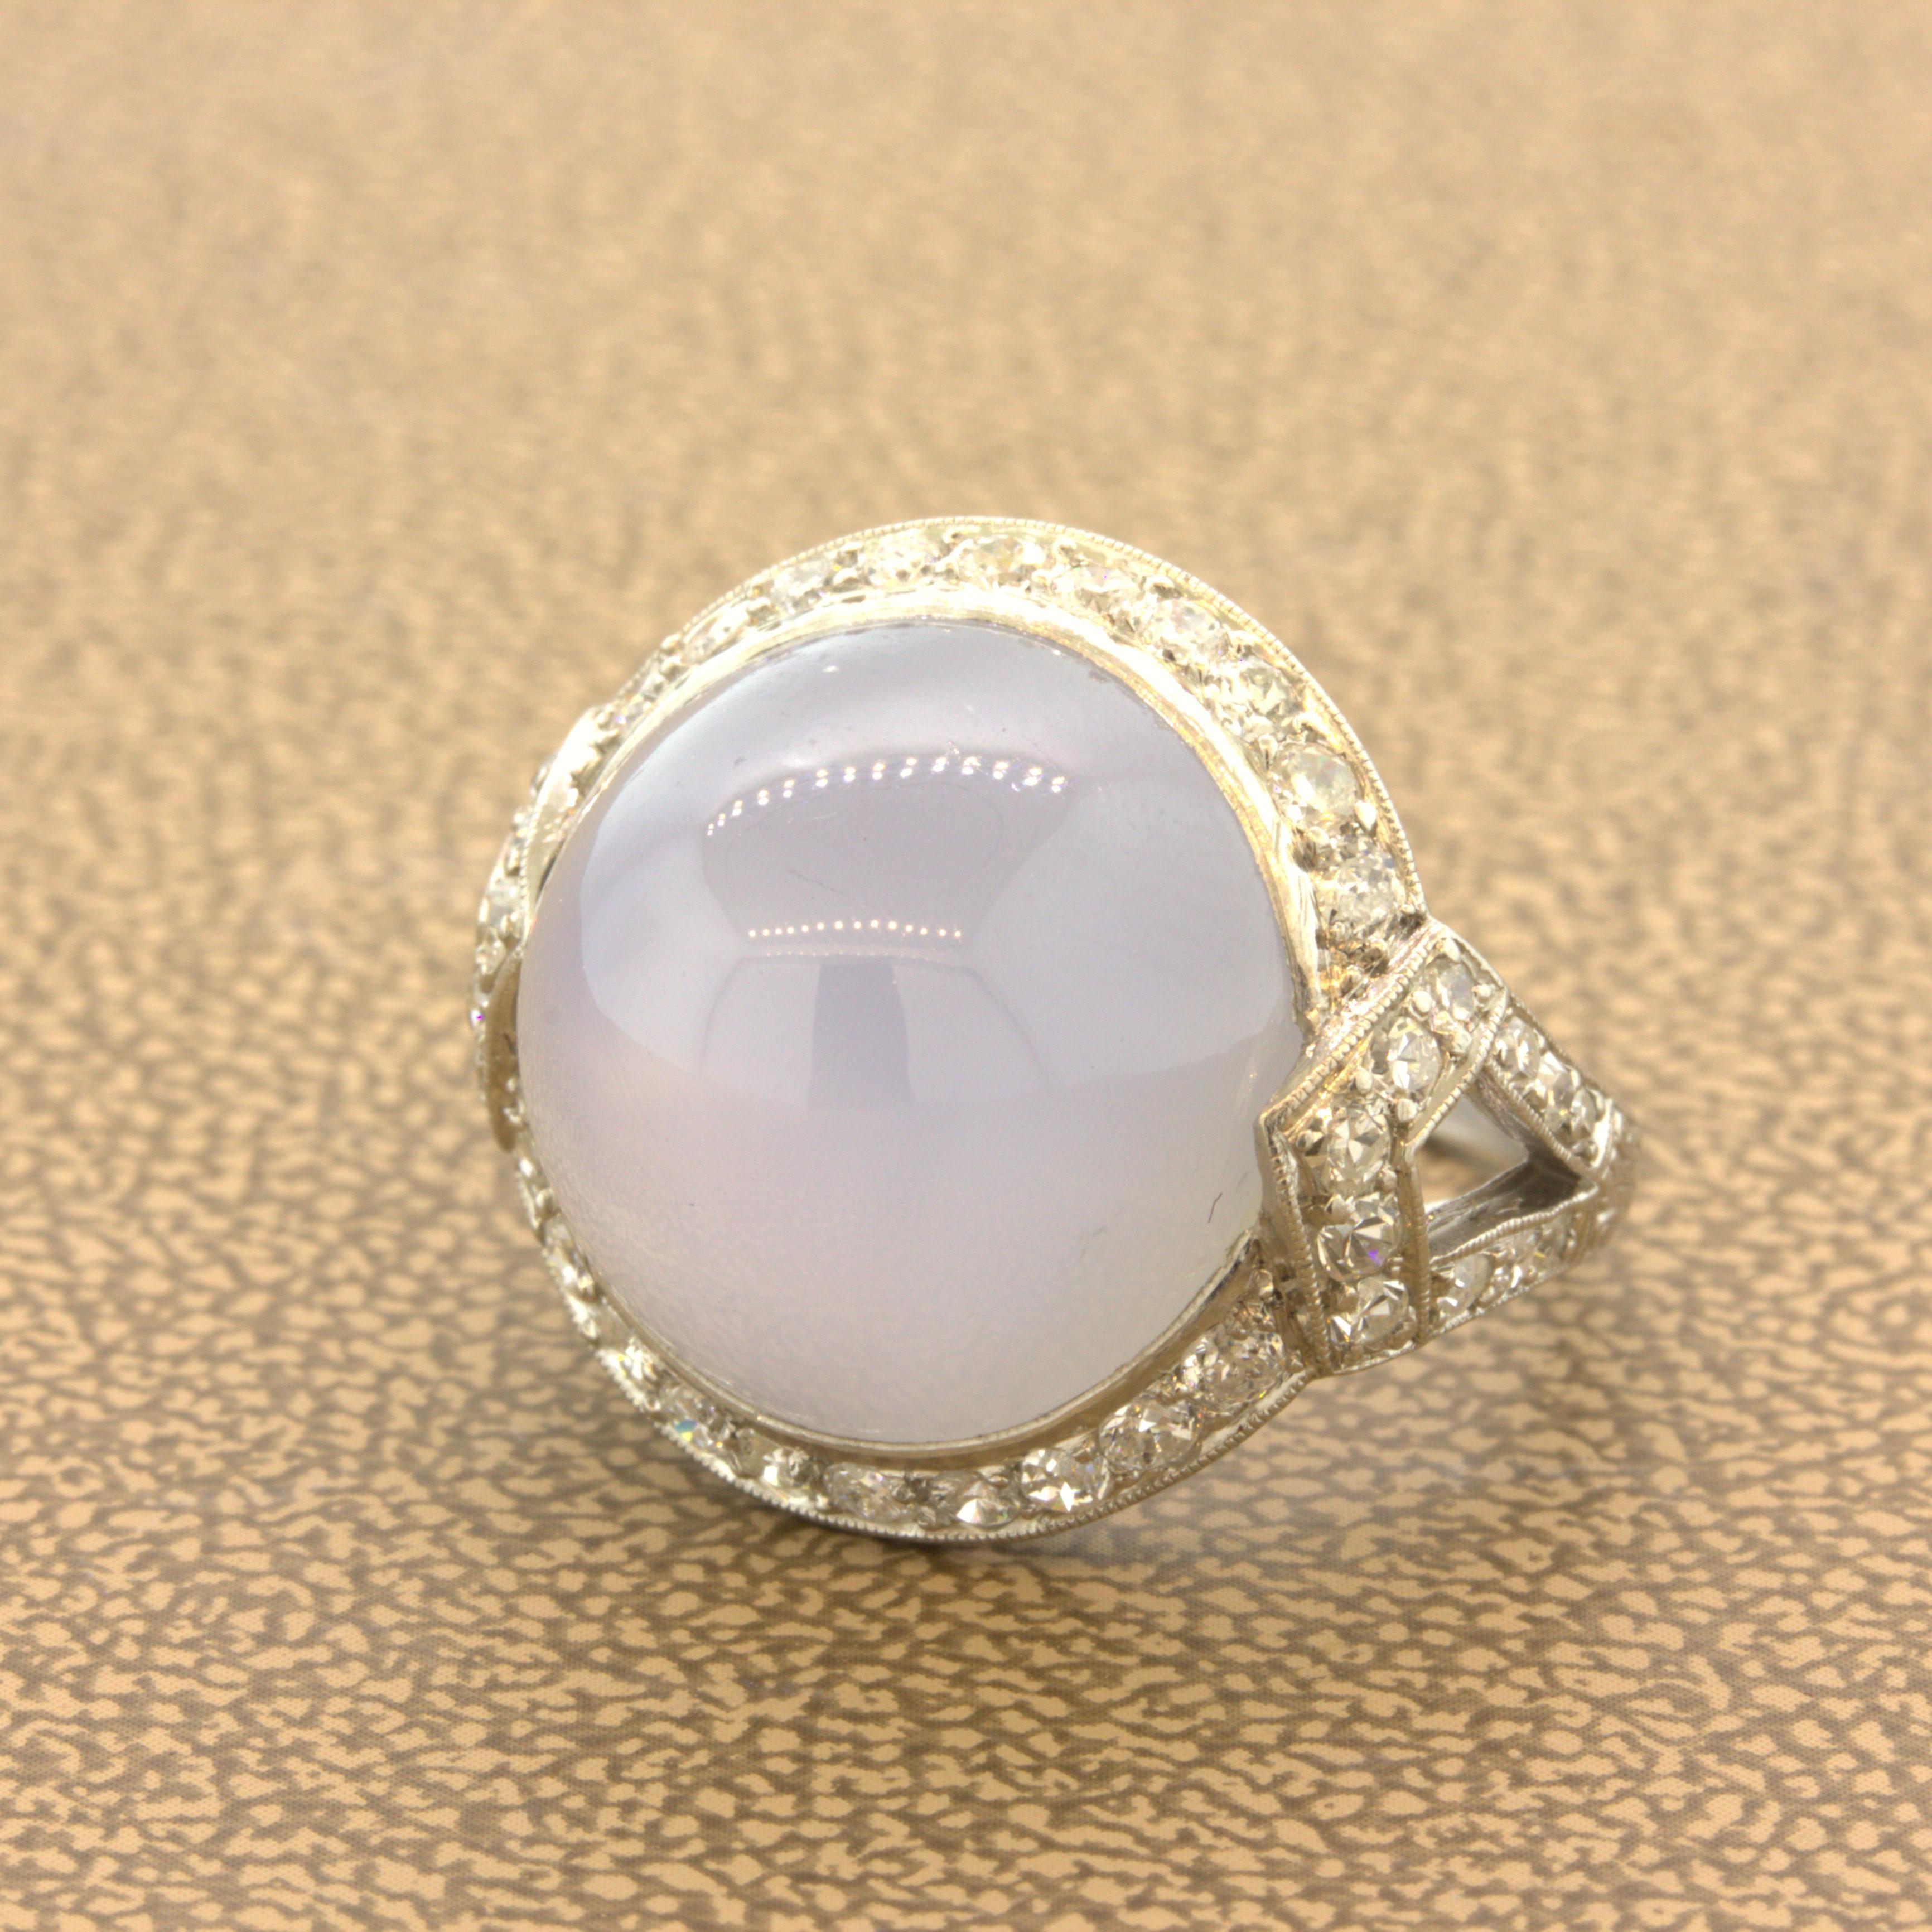 An original Art Deco treasure from the 1930’s featuring a fine star sapphire. The sapphire weighs approximately 20 carats and has an even light blue color along with a stone 6-rayed star. It is complemented by European-cut diamonds set around the